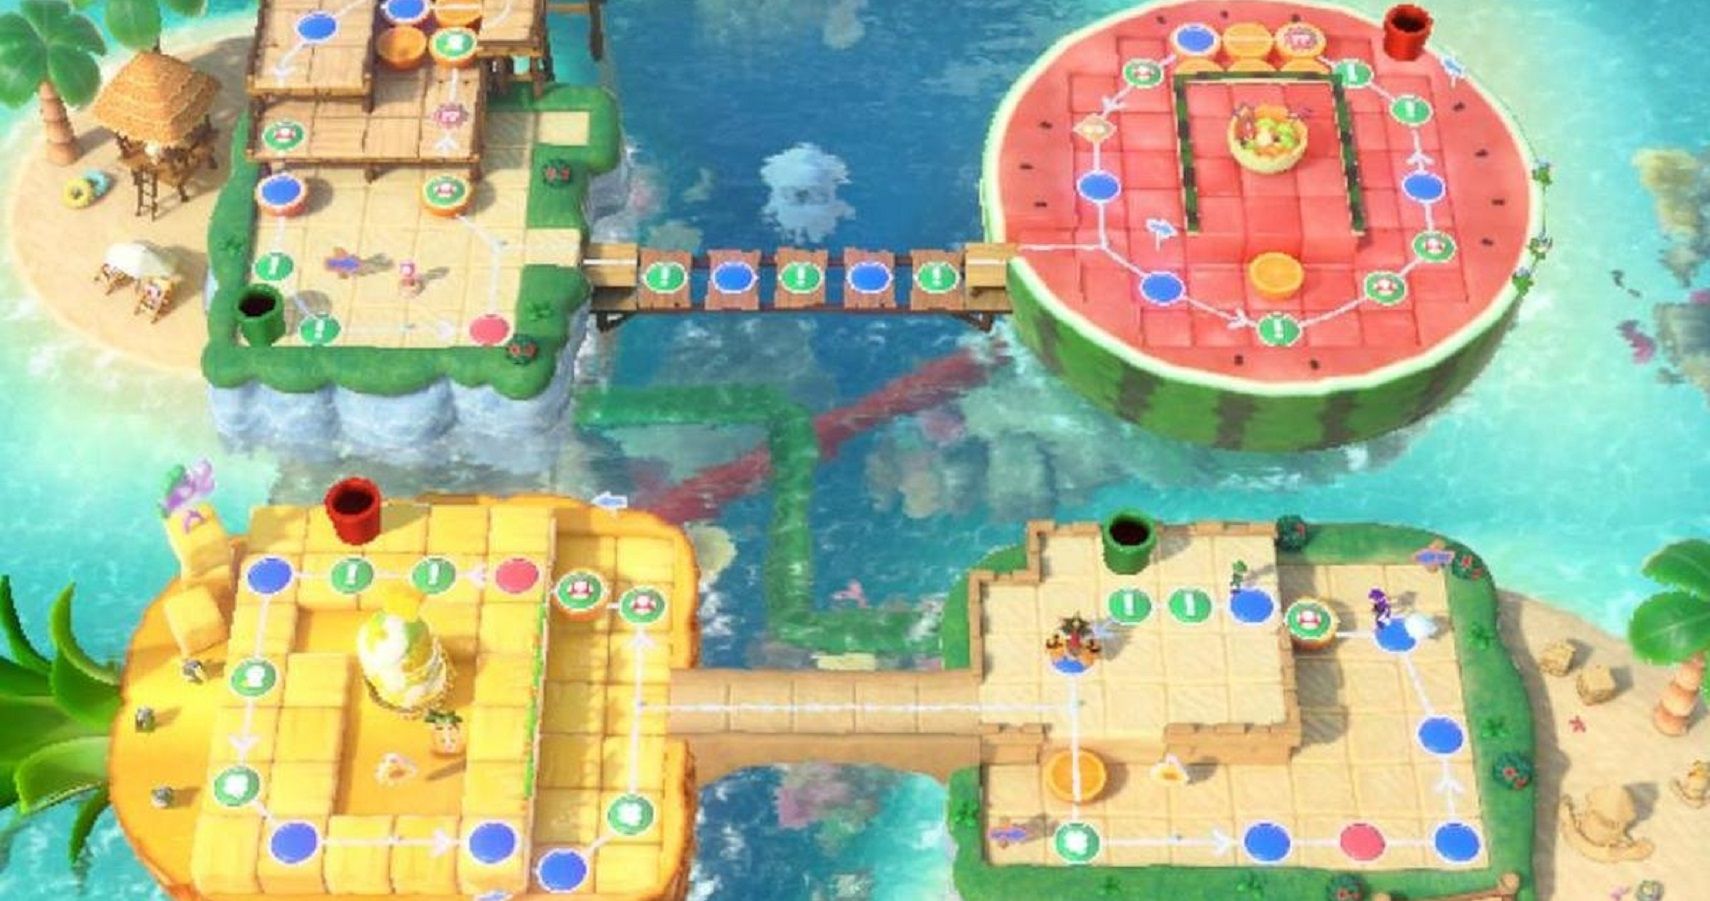 Mario Party Superstars Vs. Super Mario Party: Which Is Better?